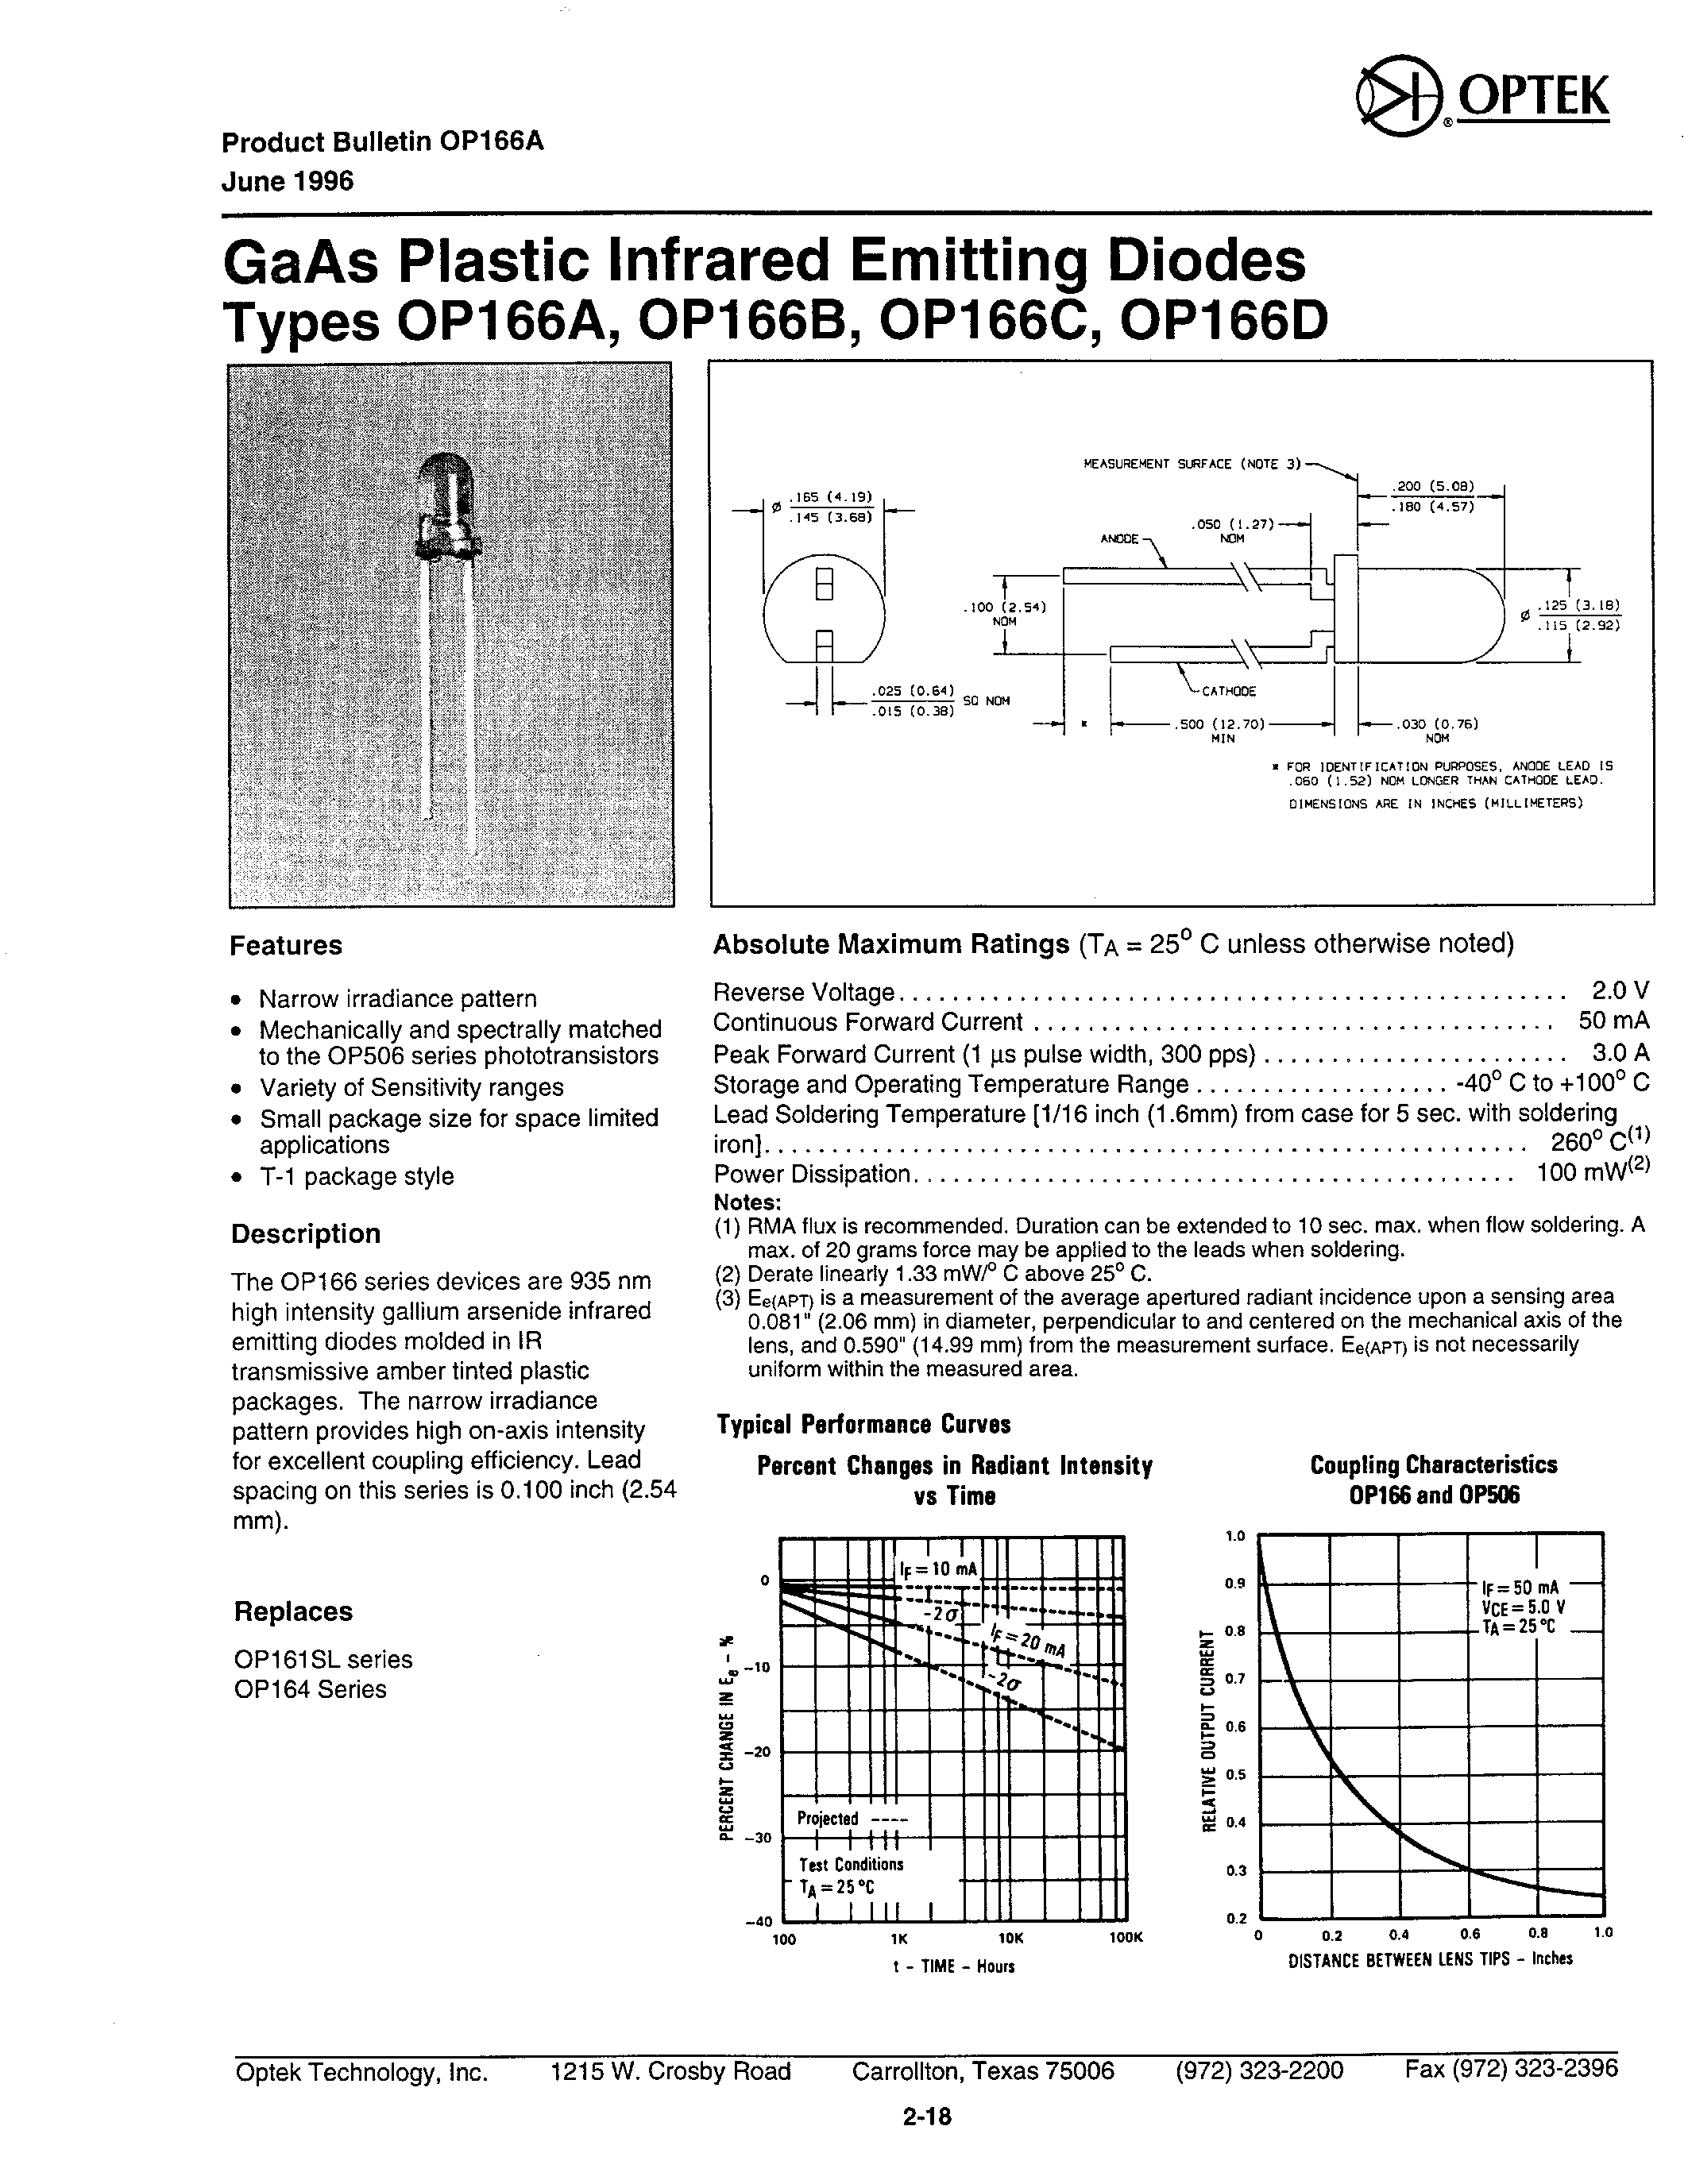 Datasheet OP166A - GaAs Plastic Infrared Emitting Diodes page 1